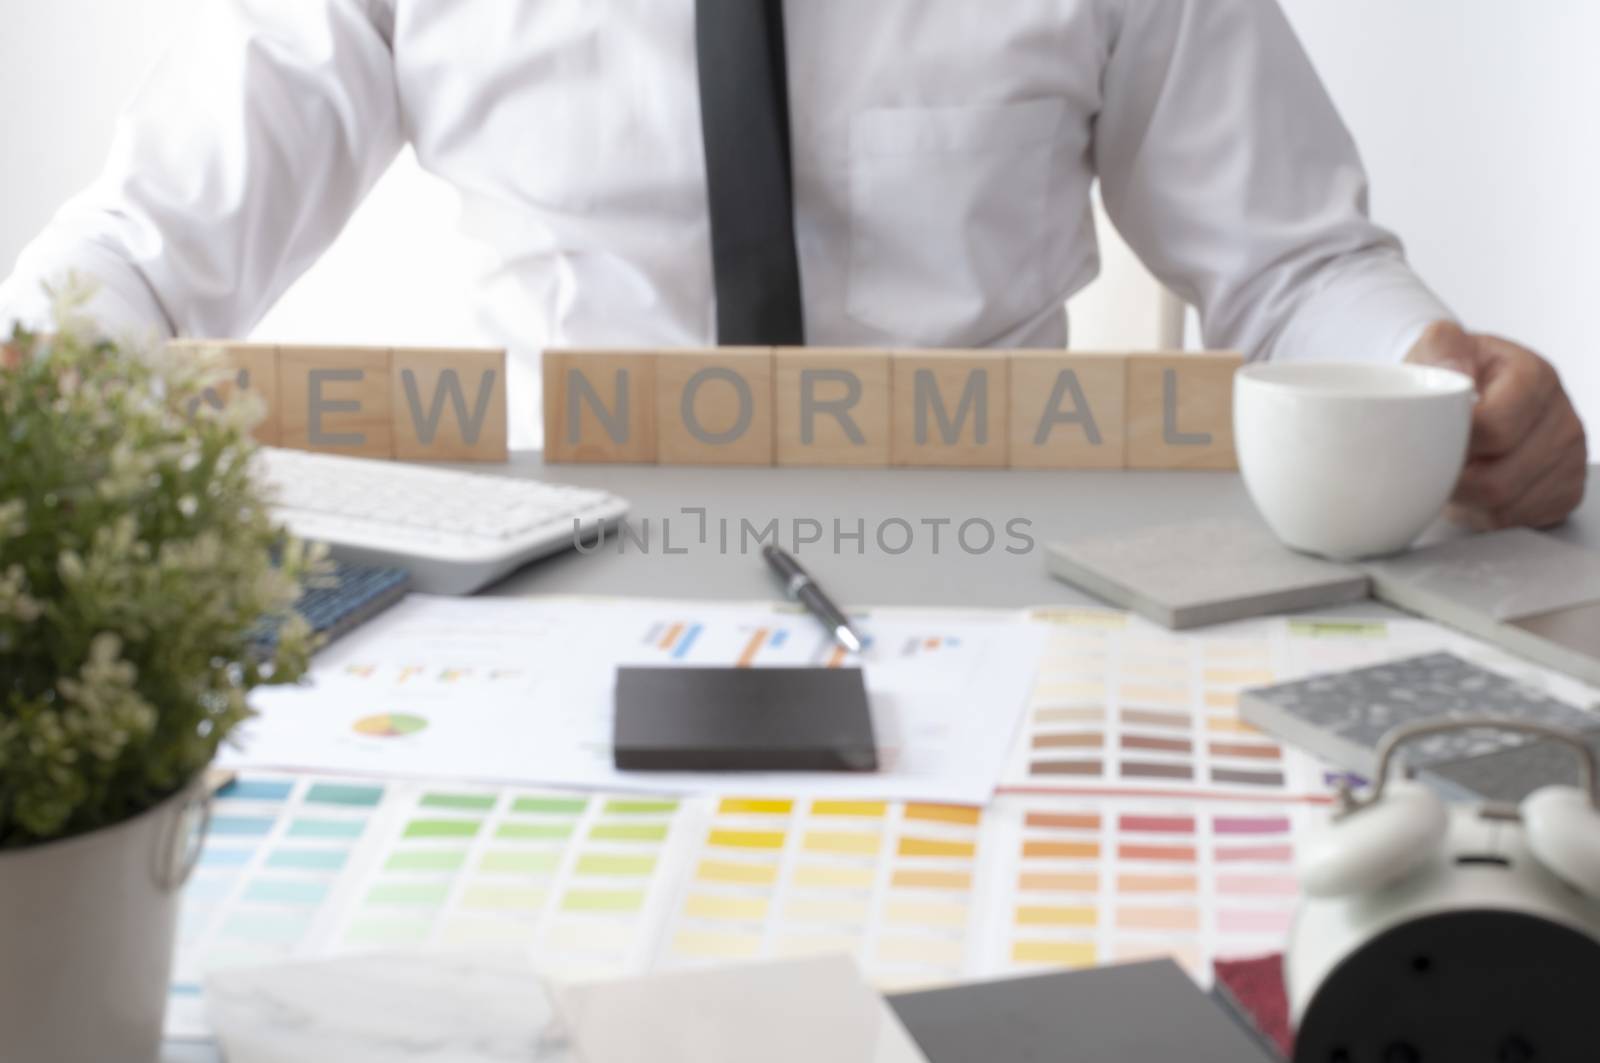 Blur background. Man hold coffee cup on the table. New normal text on interior desk. Materials construction on the table.